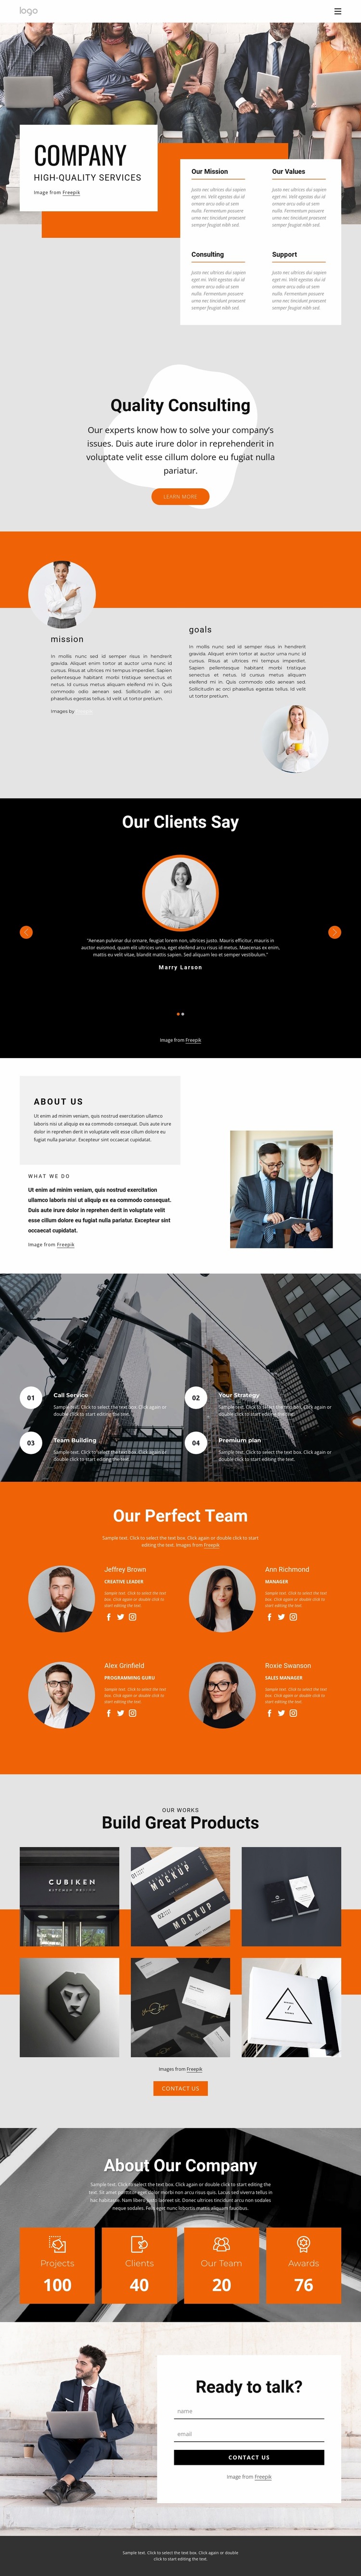 Hight quality consulting firm Website Mockup